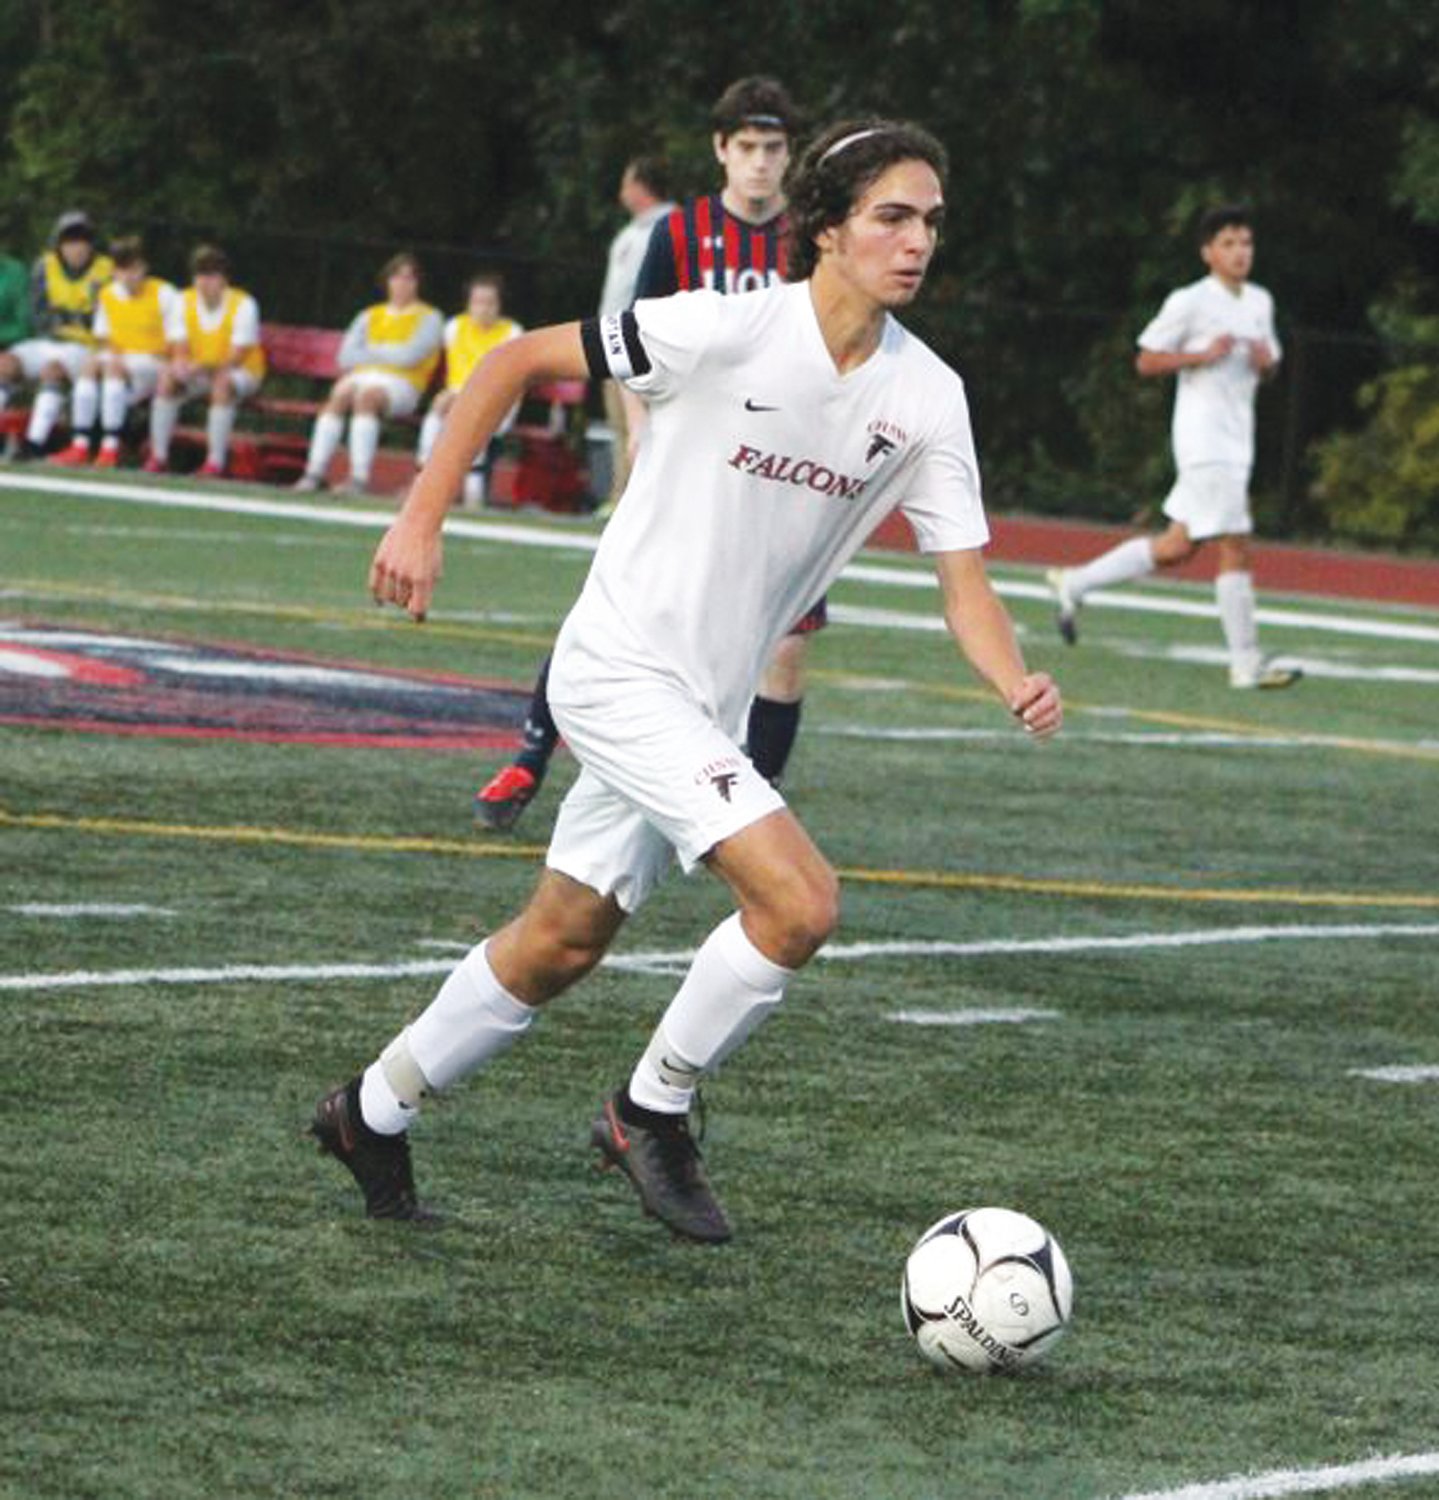 STATEMENT WIN: Cranston West’s Jordan Thibodeau dribbles the ball up the field last week when the Falcons traveled to Lincoln to square off against the Lions. The Falcons pulled off the upset with a 2-1 victory to hand Lincoln its first loss of the season.